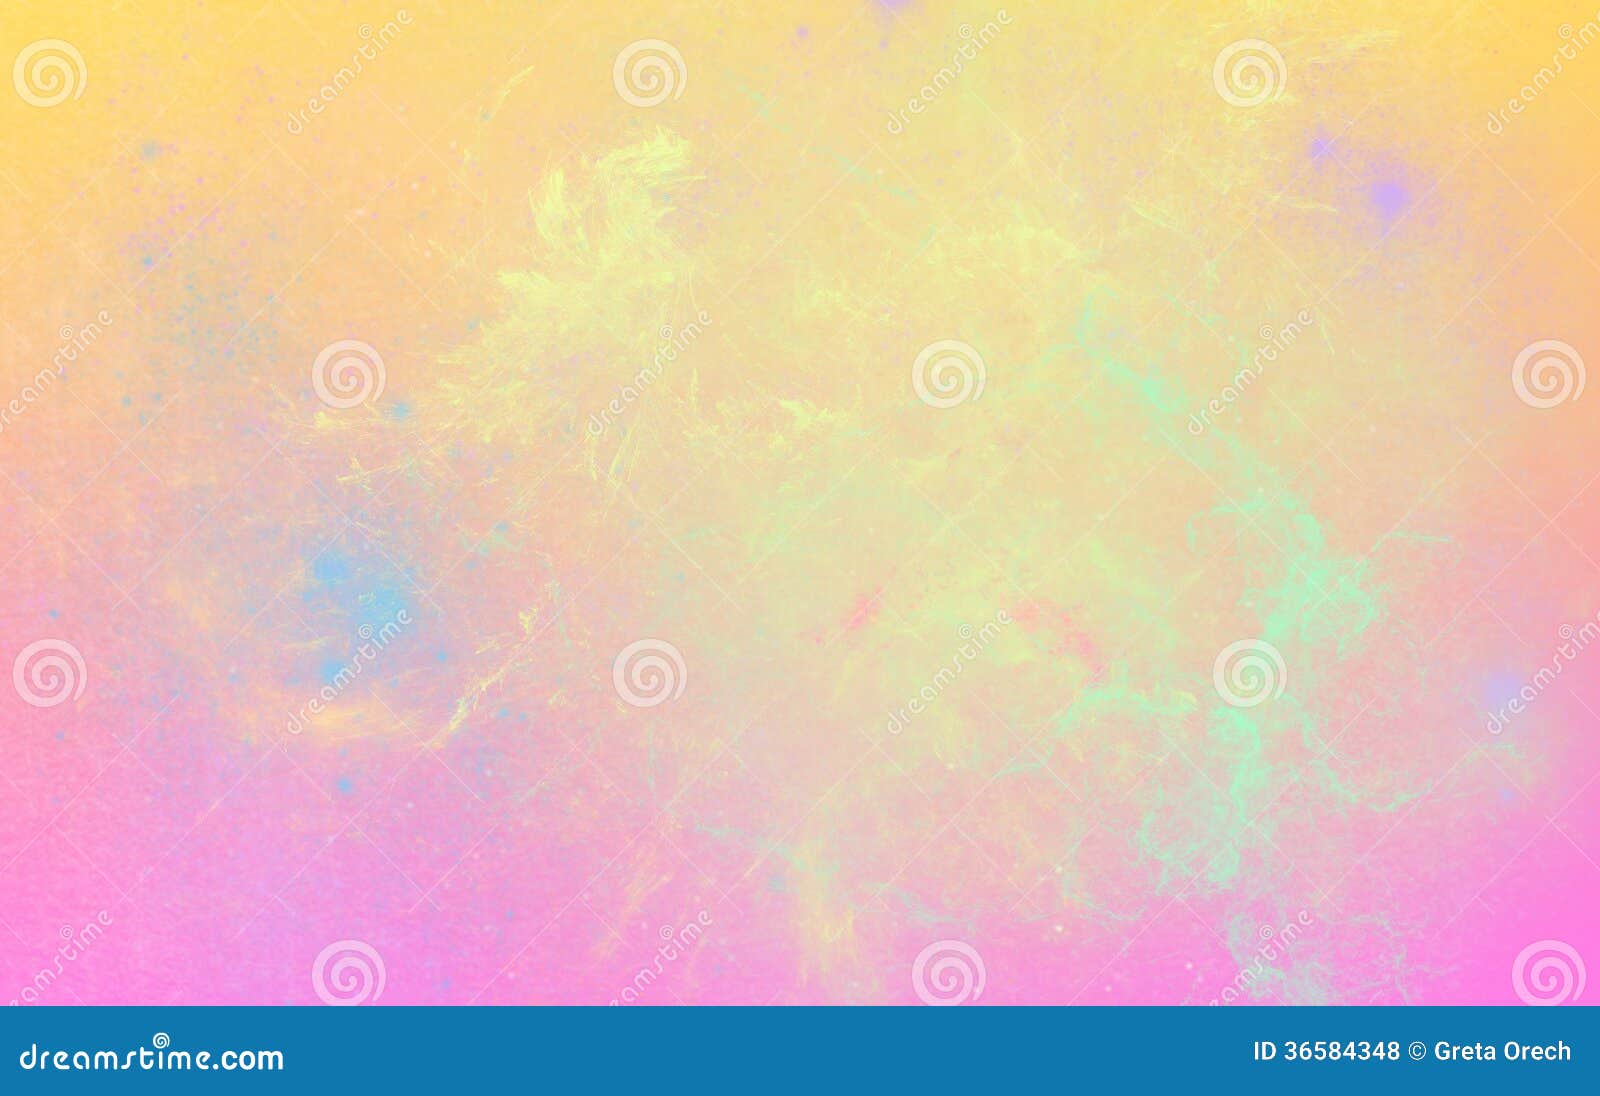 Cute pastel yellow backgrounds